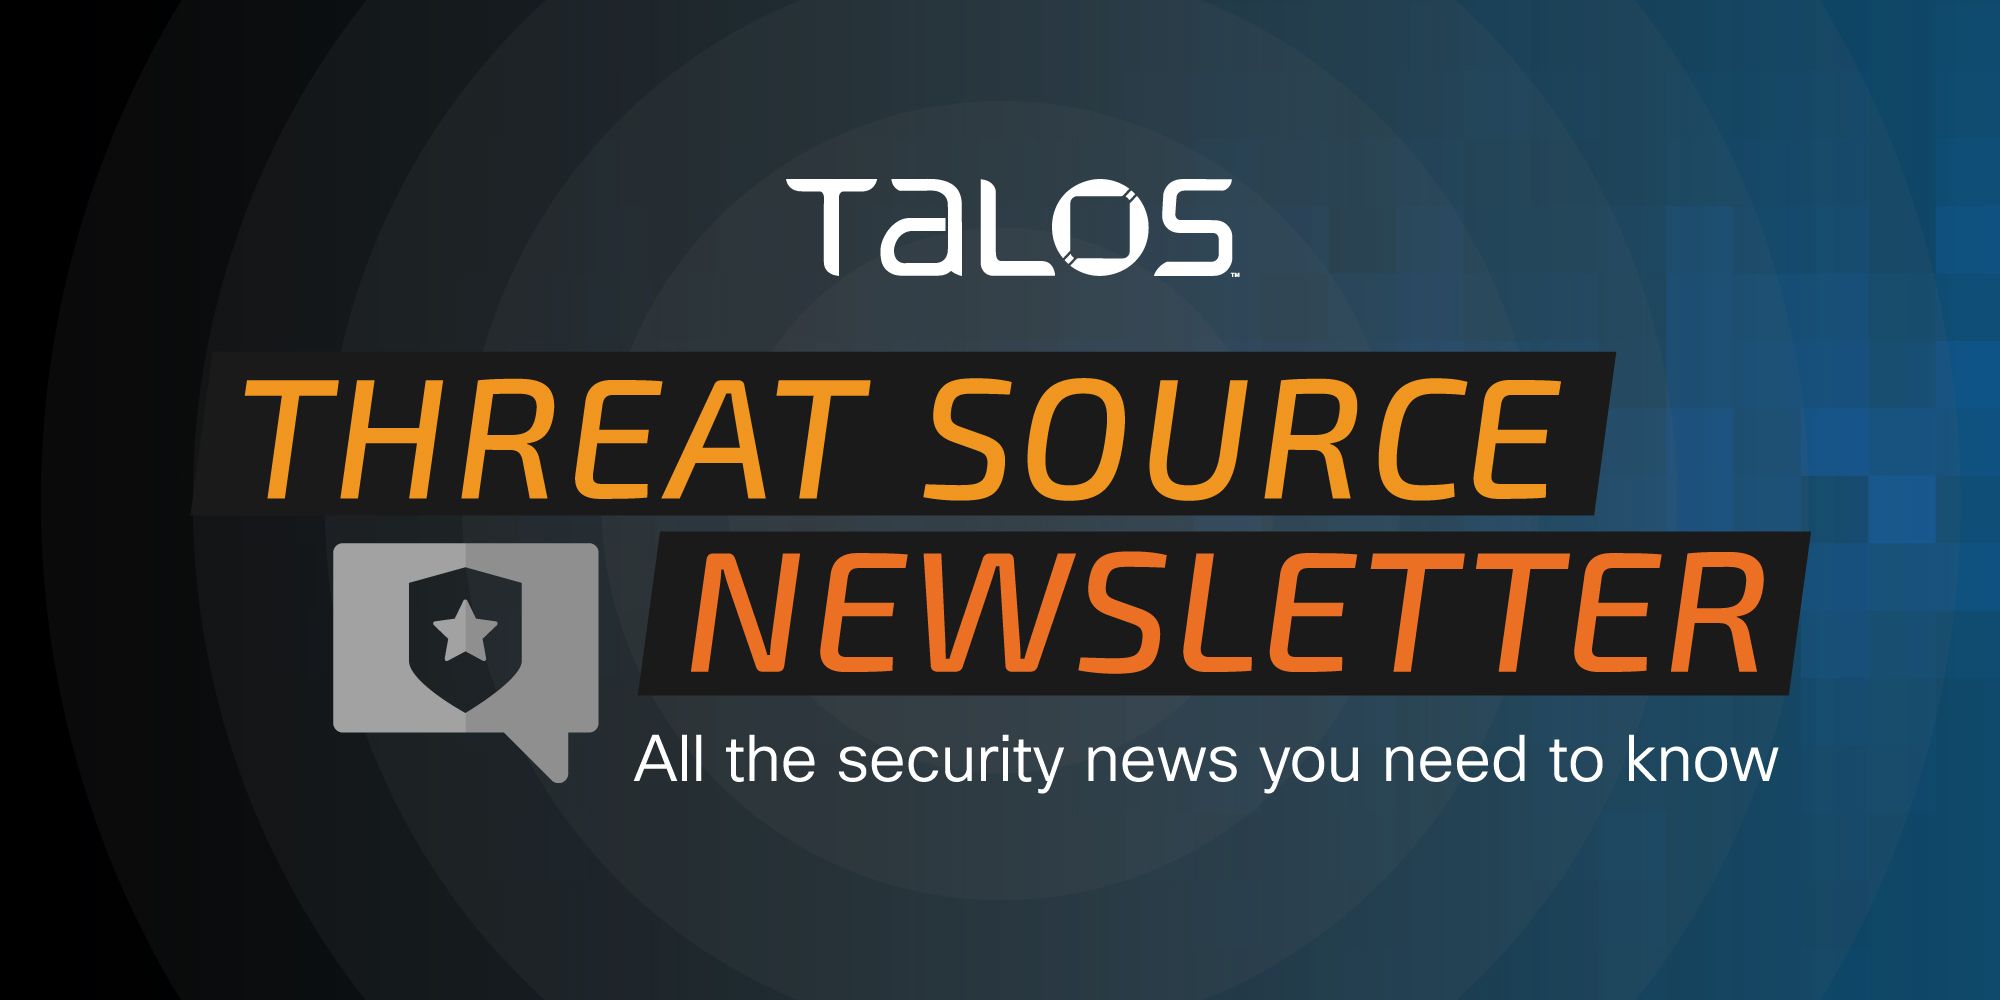 Threat Source newsletter (Feb. 16, 2023) — Recapping what we may have missed so far this year